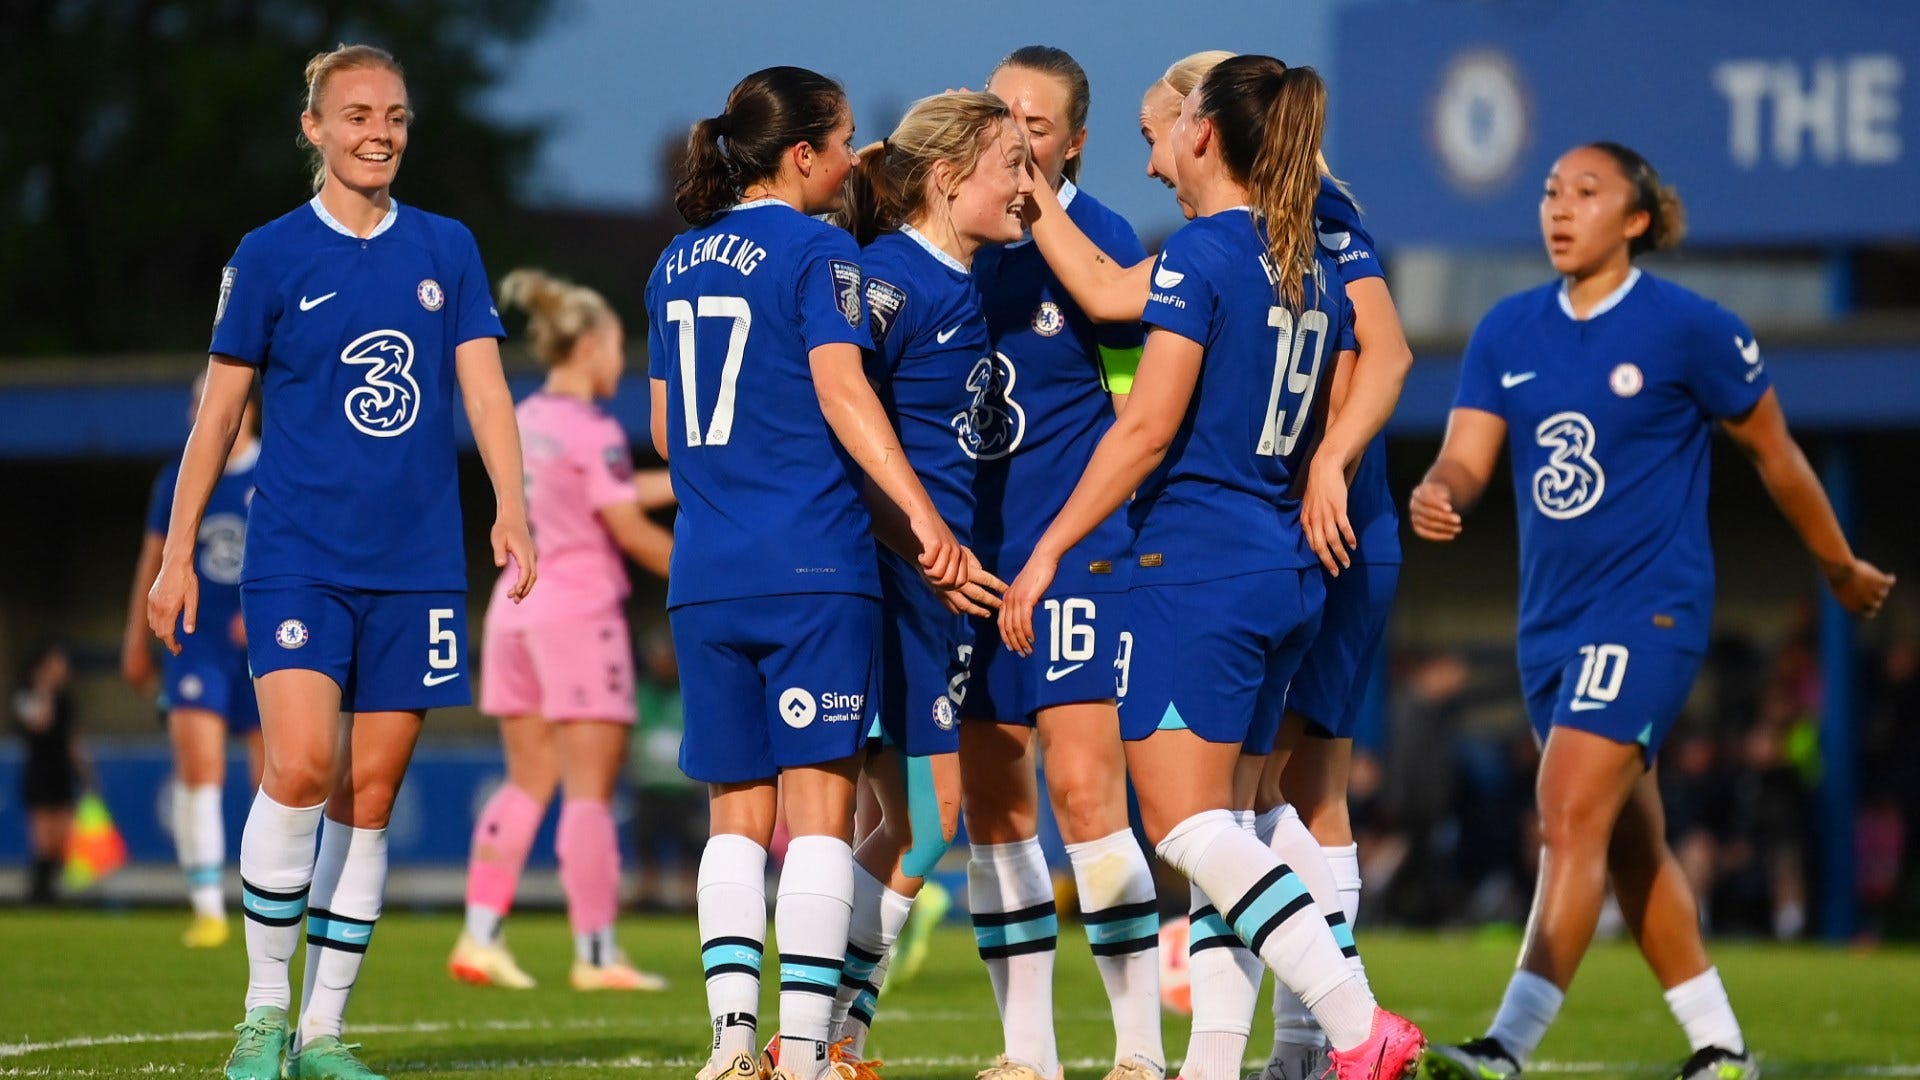 Look out, Manchester United! Chelsea close in on Womens Super League leaders with hammering of Everton despite Sam Kerr injury Goal India